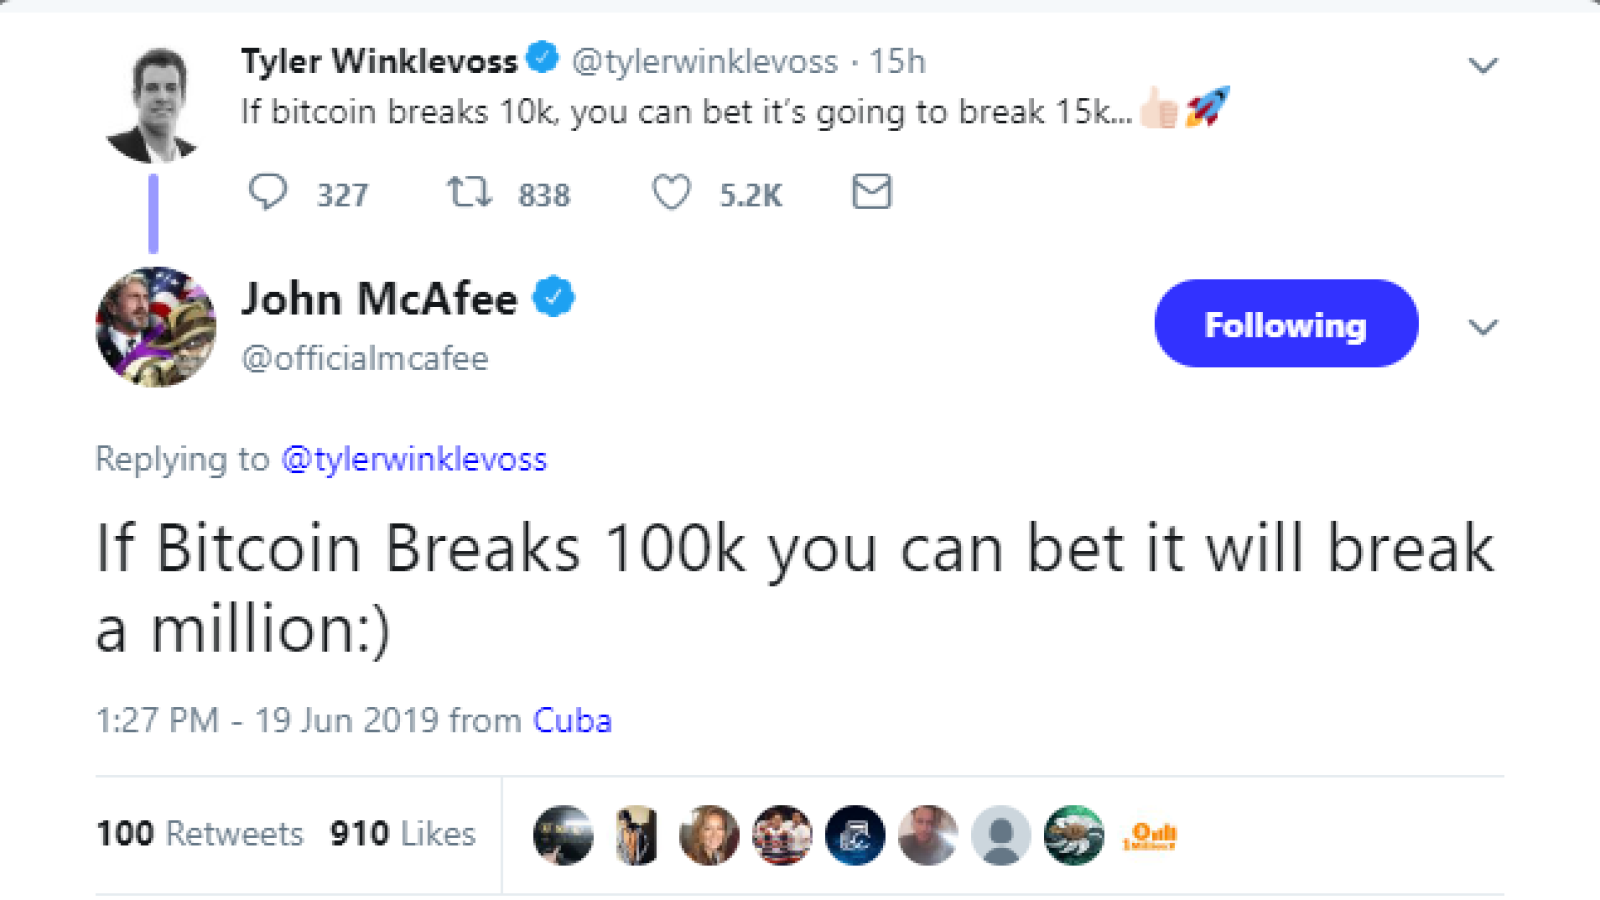 McAfee responded, saying that if BTC can hit $100,000